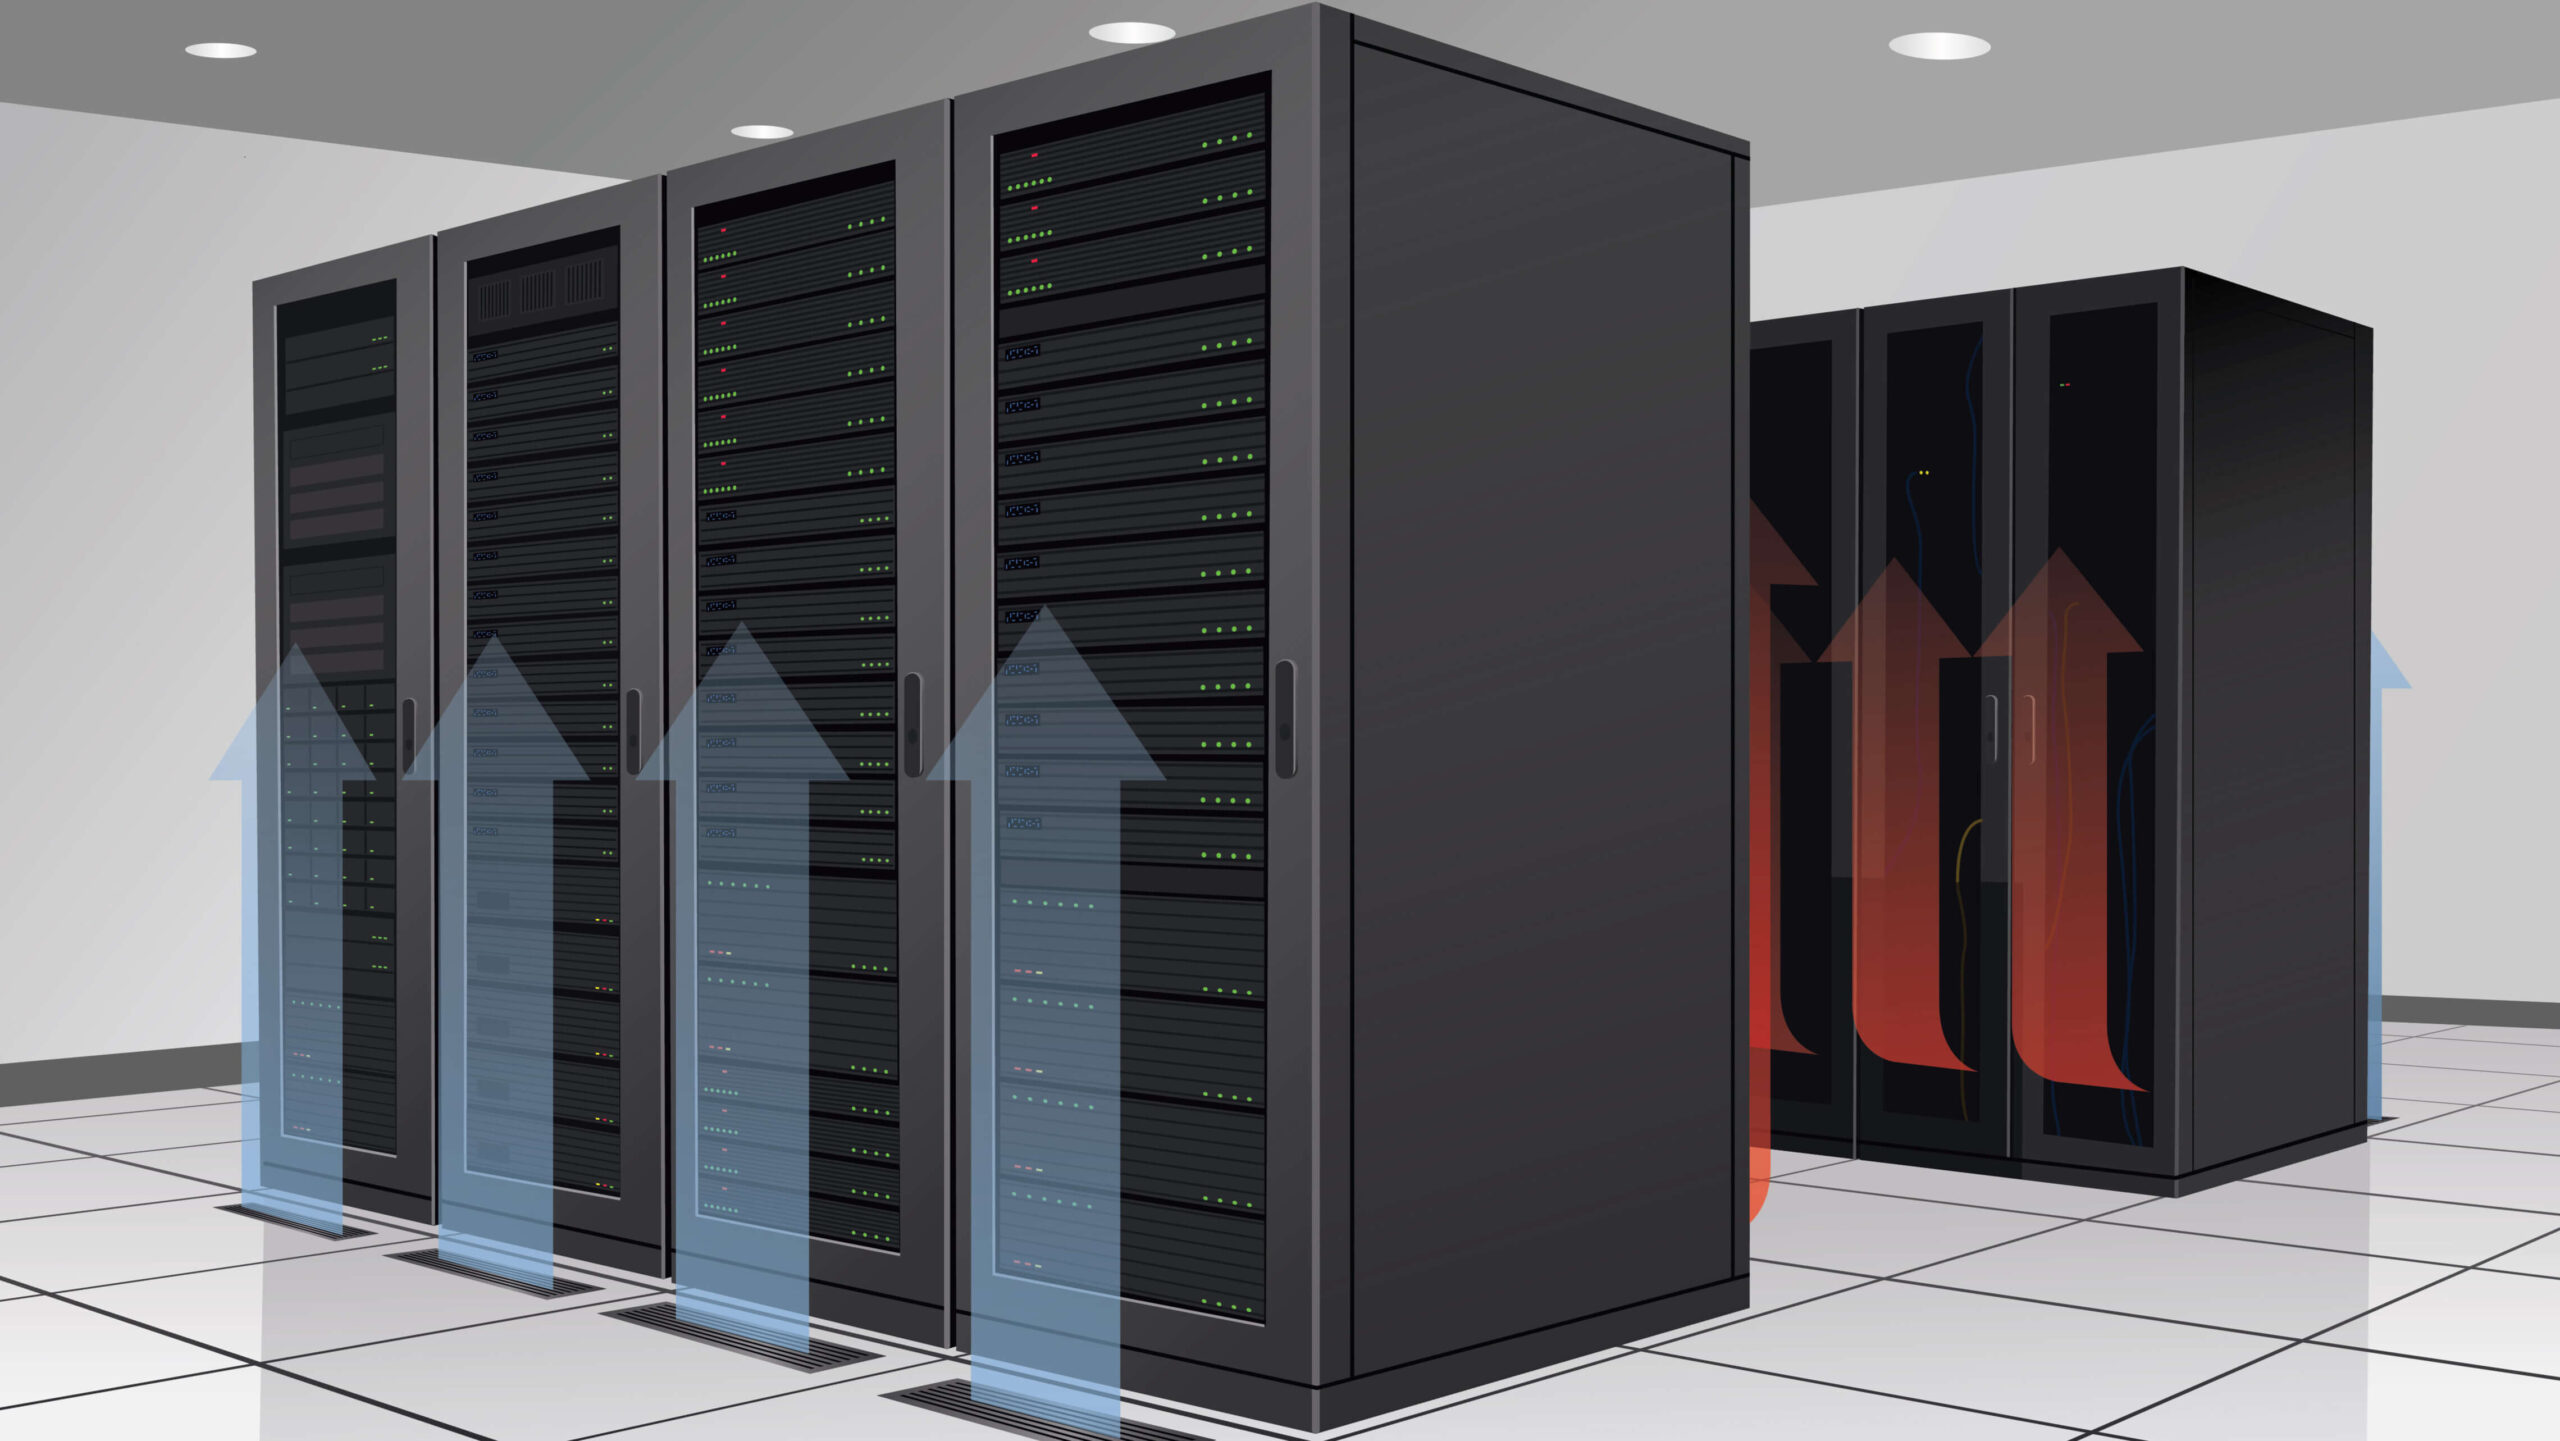 Data centers use thermal management to control the flow of heat